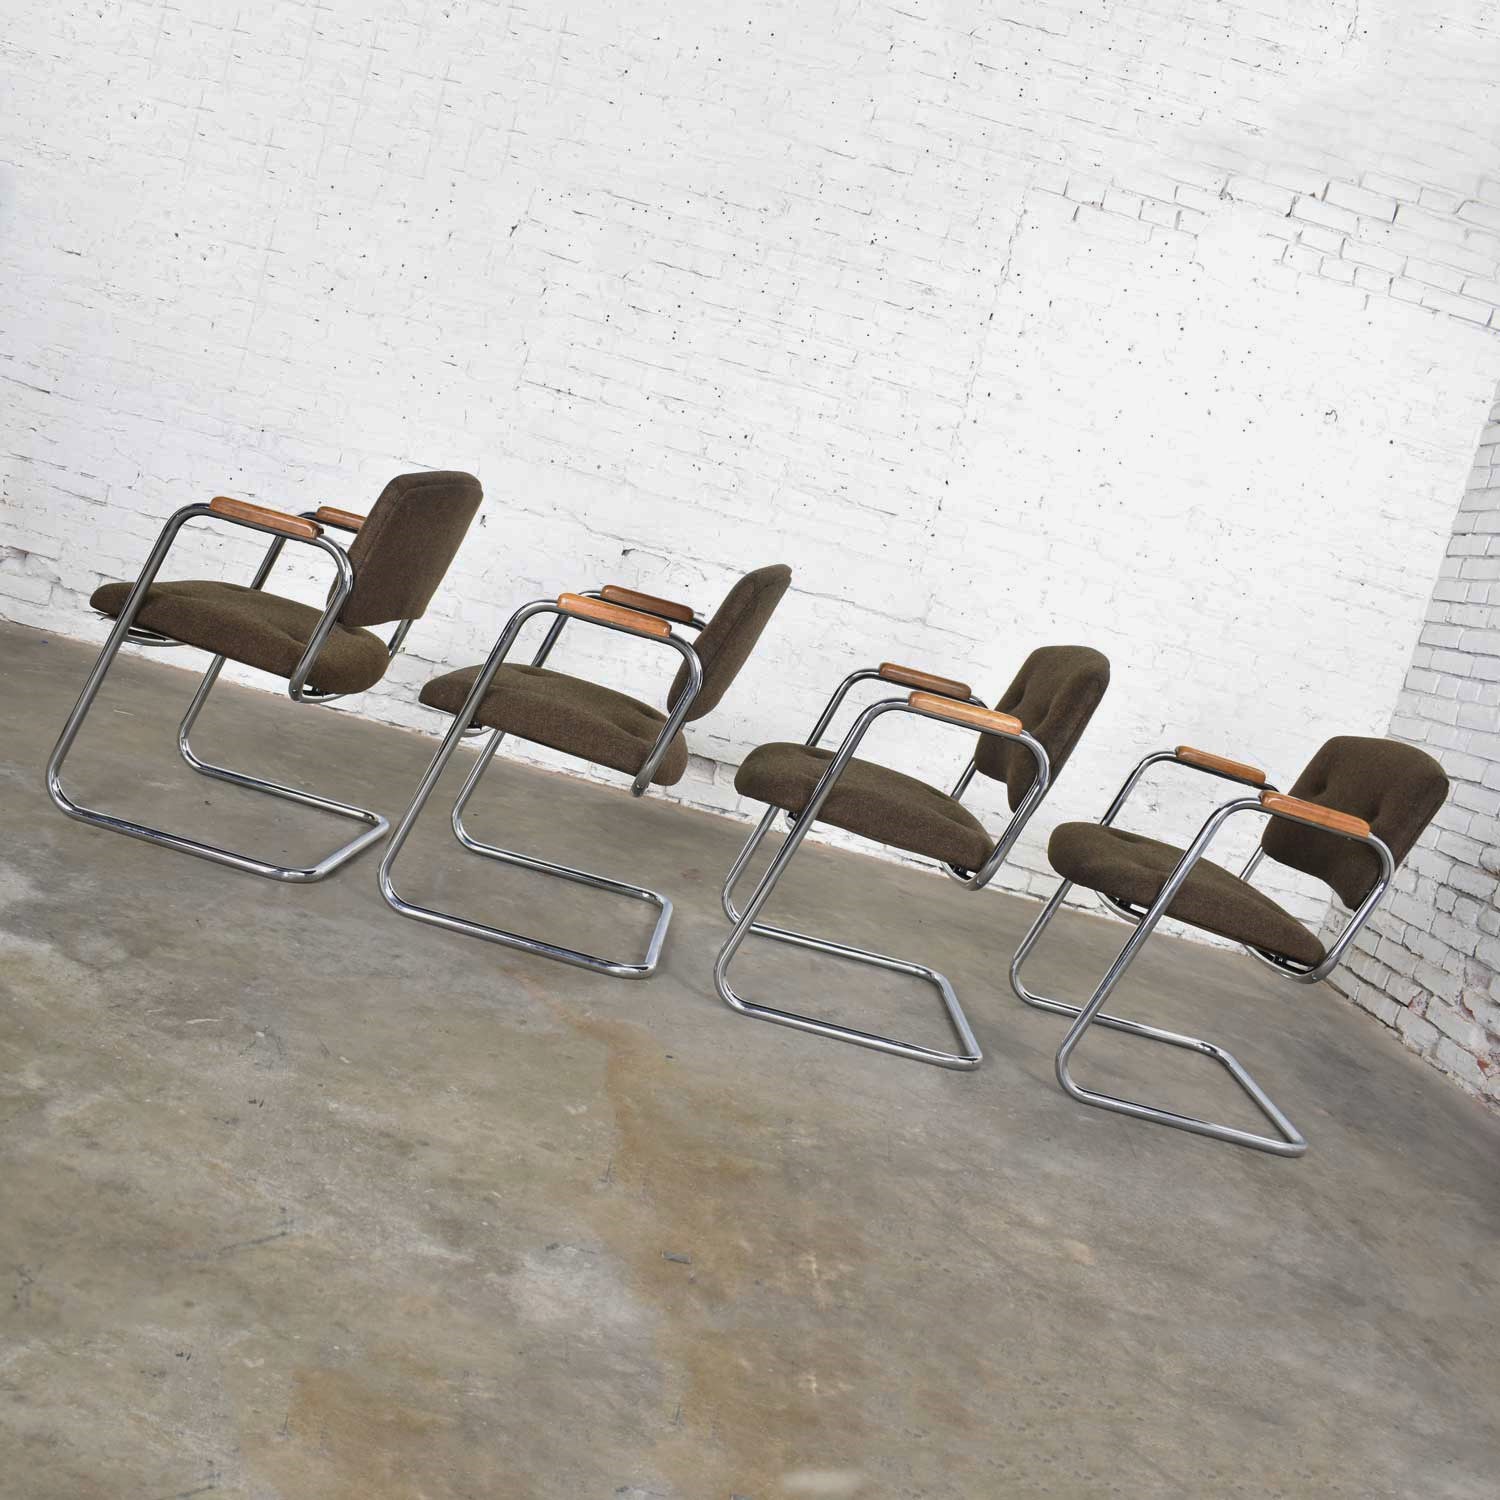 Set 4 Cantilever Armchairs Chrome and Brown w/ Wood Arms Style of Steelcase or Pollack 1970